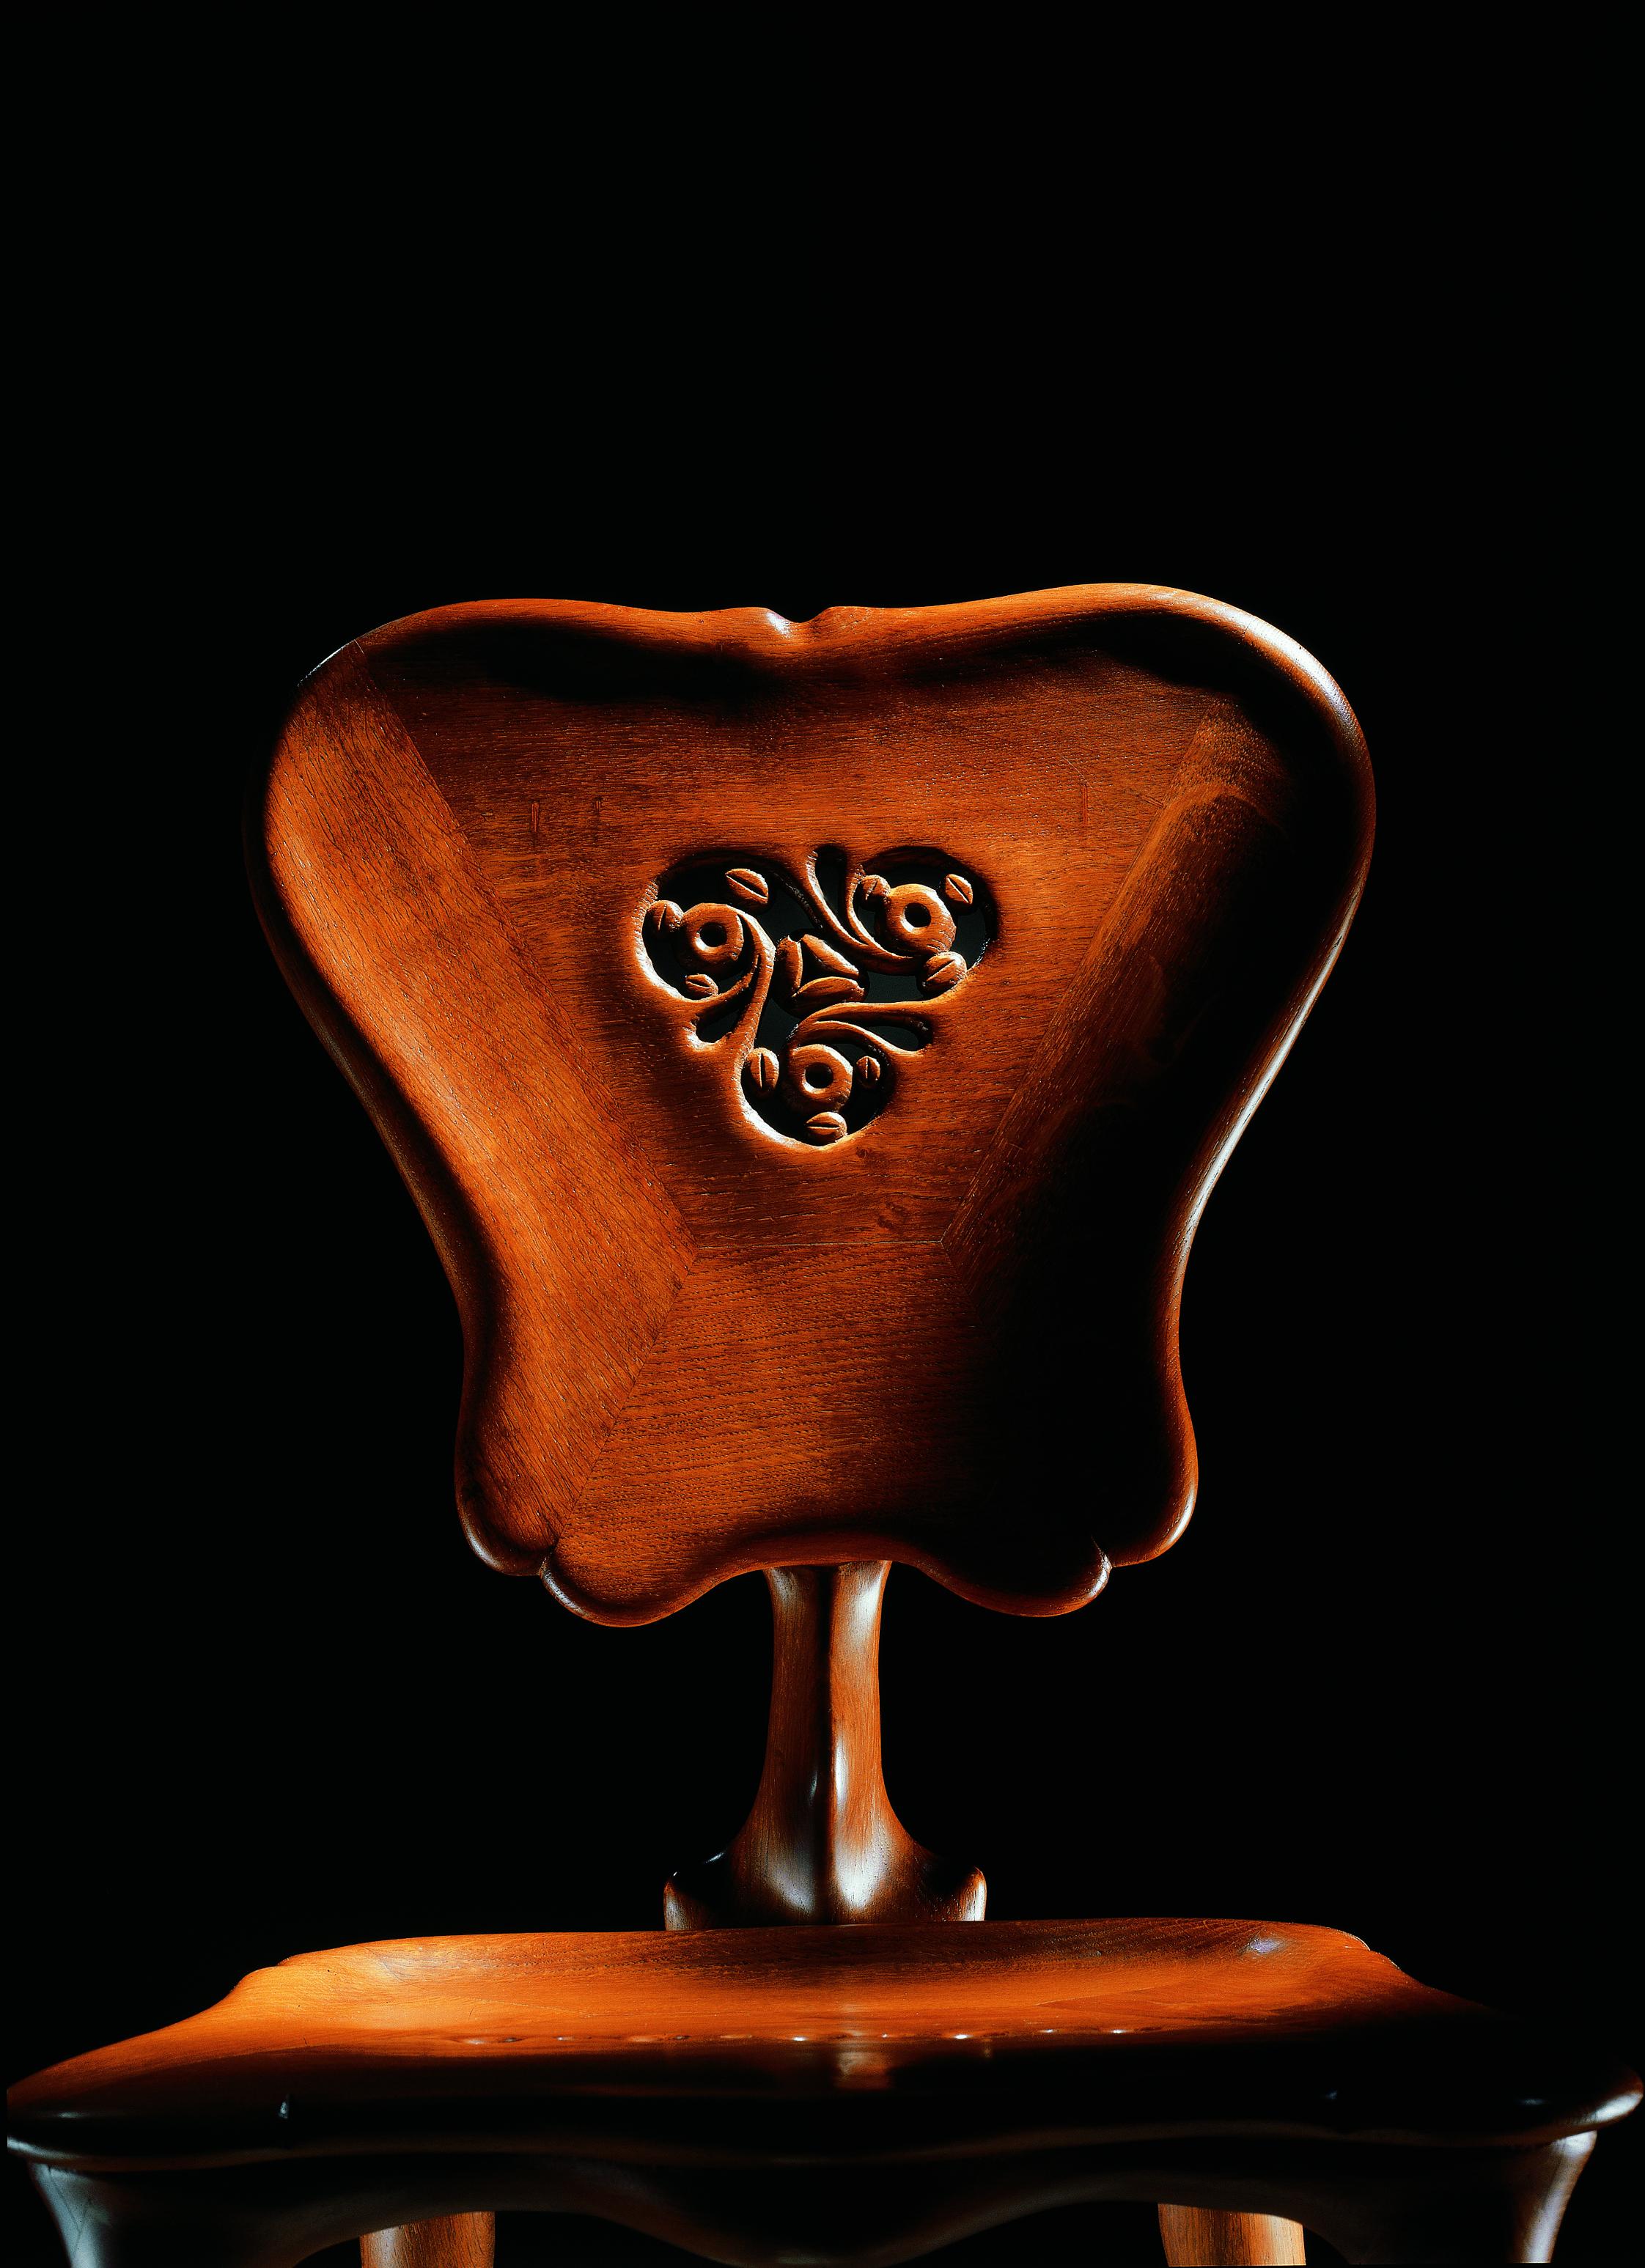 Gaudí designed a chair for the Casa Calvet. One that was rich in form and representative of his timeless creativity.

The Calvet chair features outstanding artisanal ornamental carving on the seatback. The chair is stunning from all angles, and the